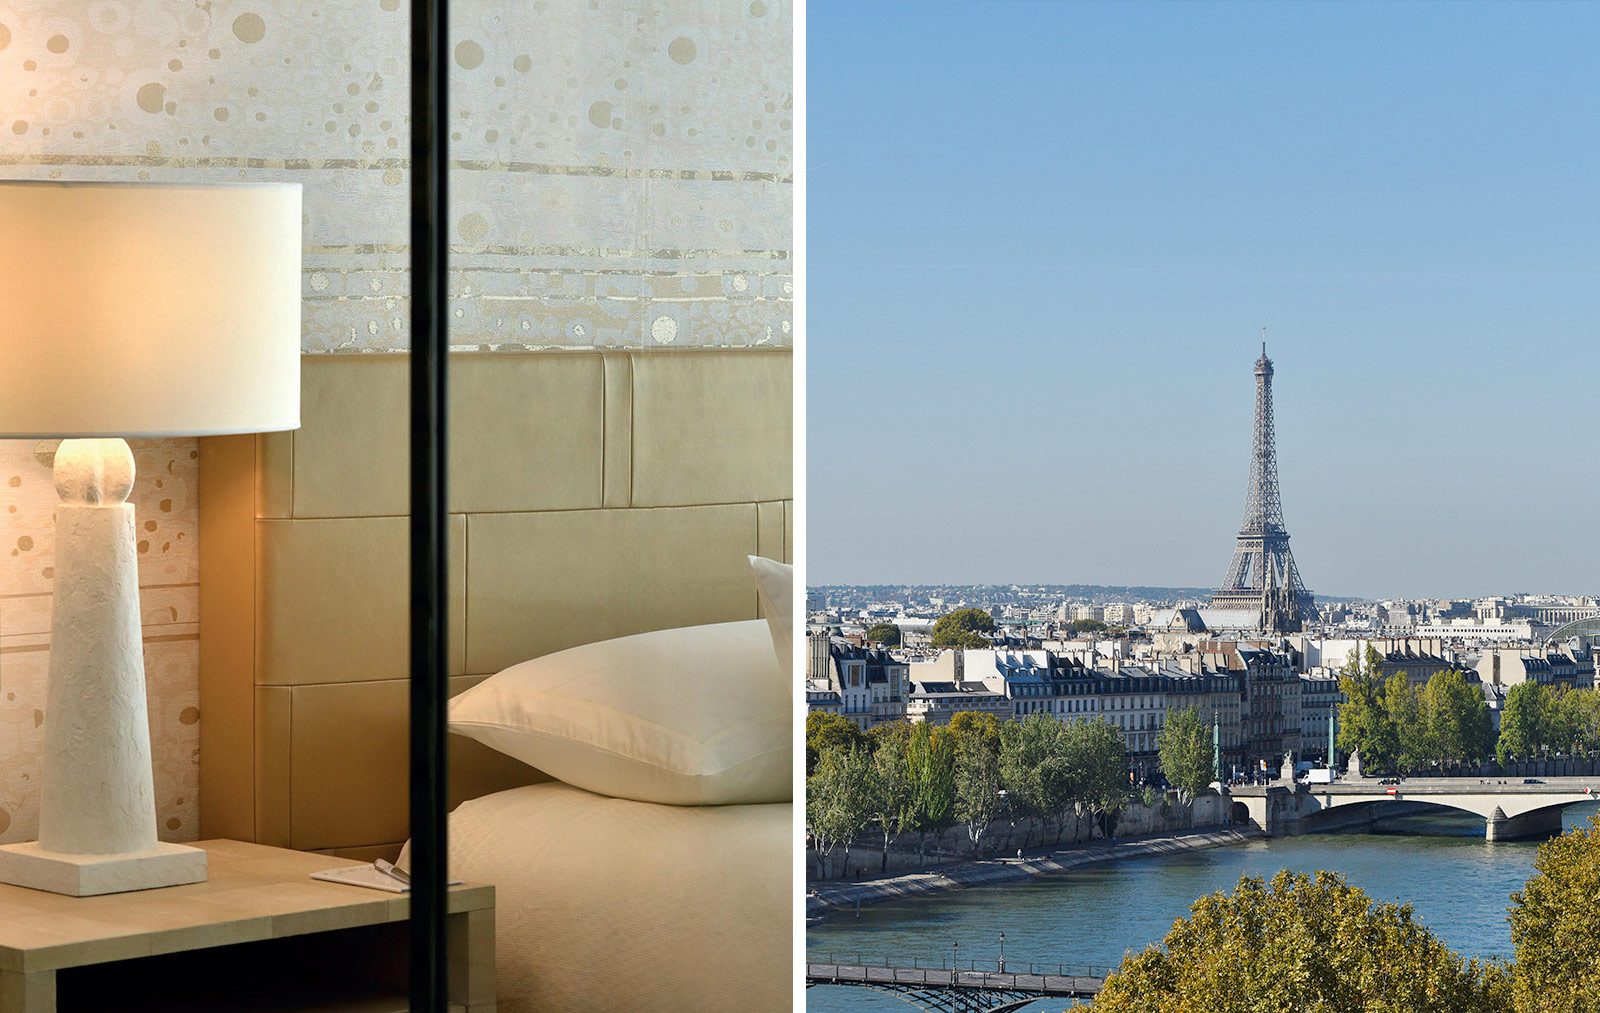 Cheval Blanc Paris room interior detail and view of Paris with the Eiffel Tower and Seine River